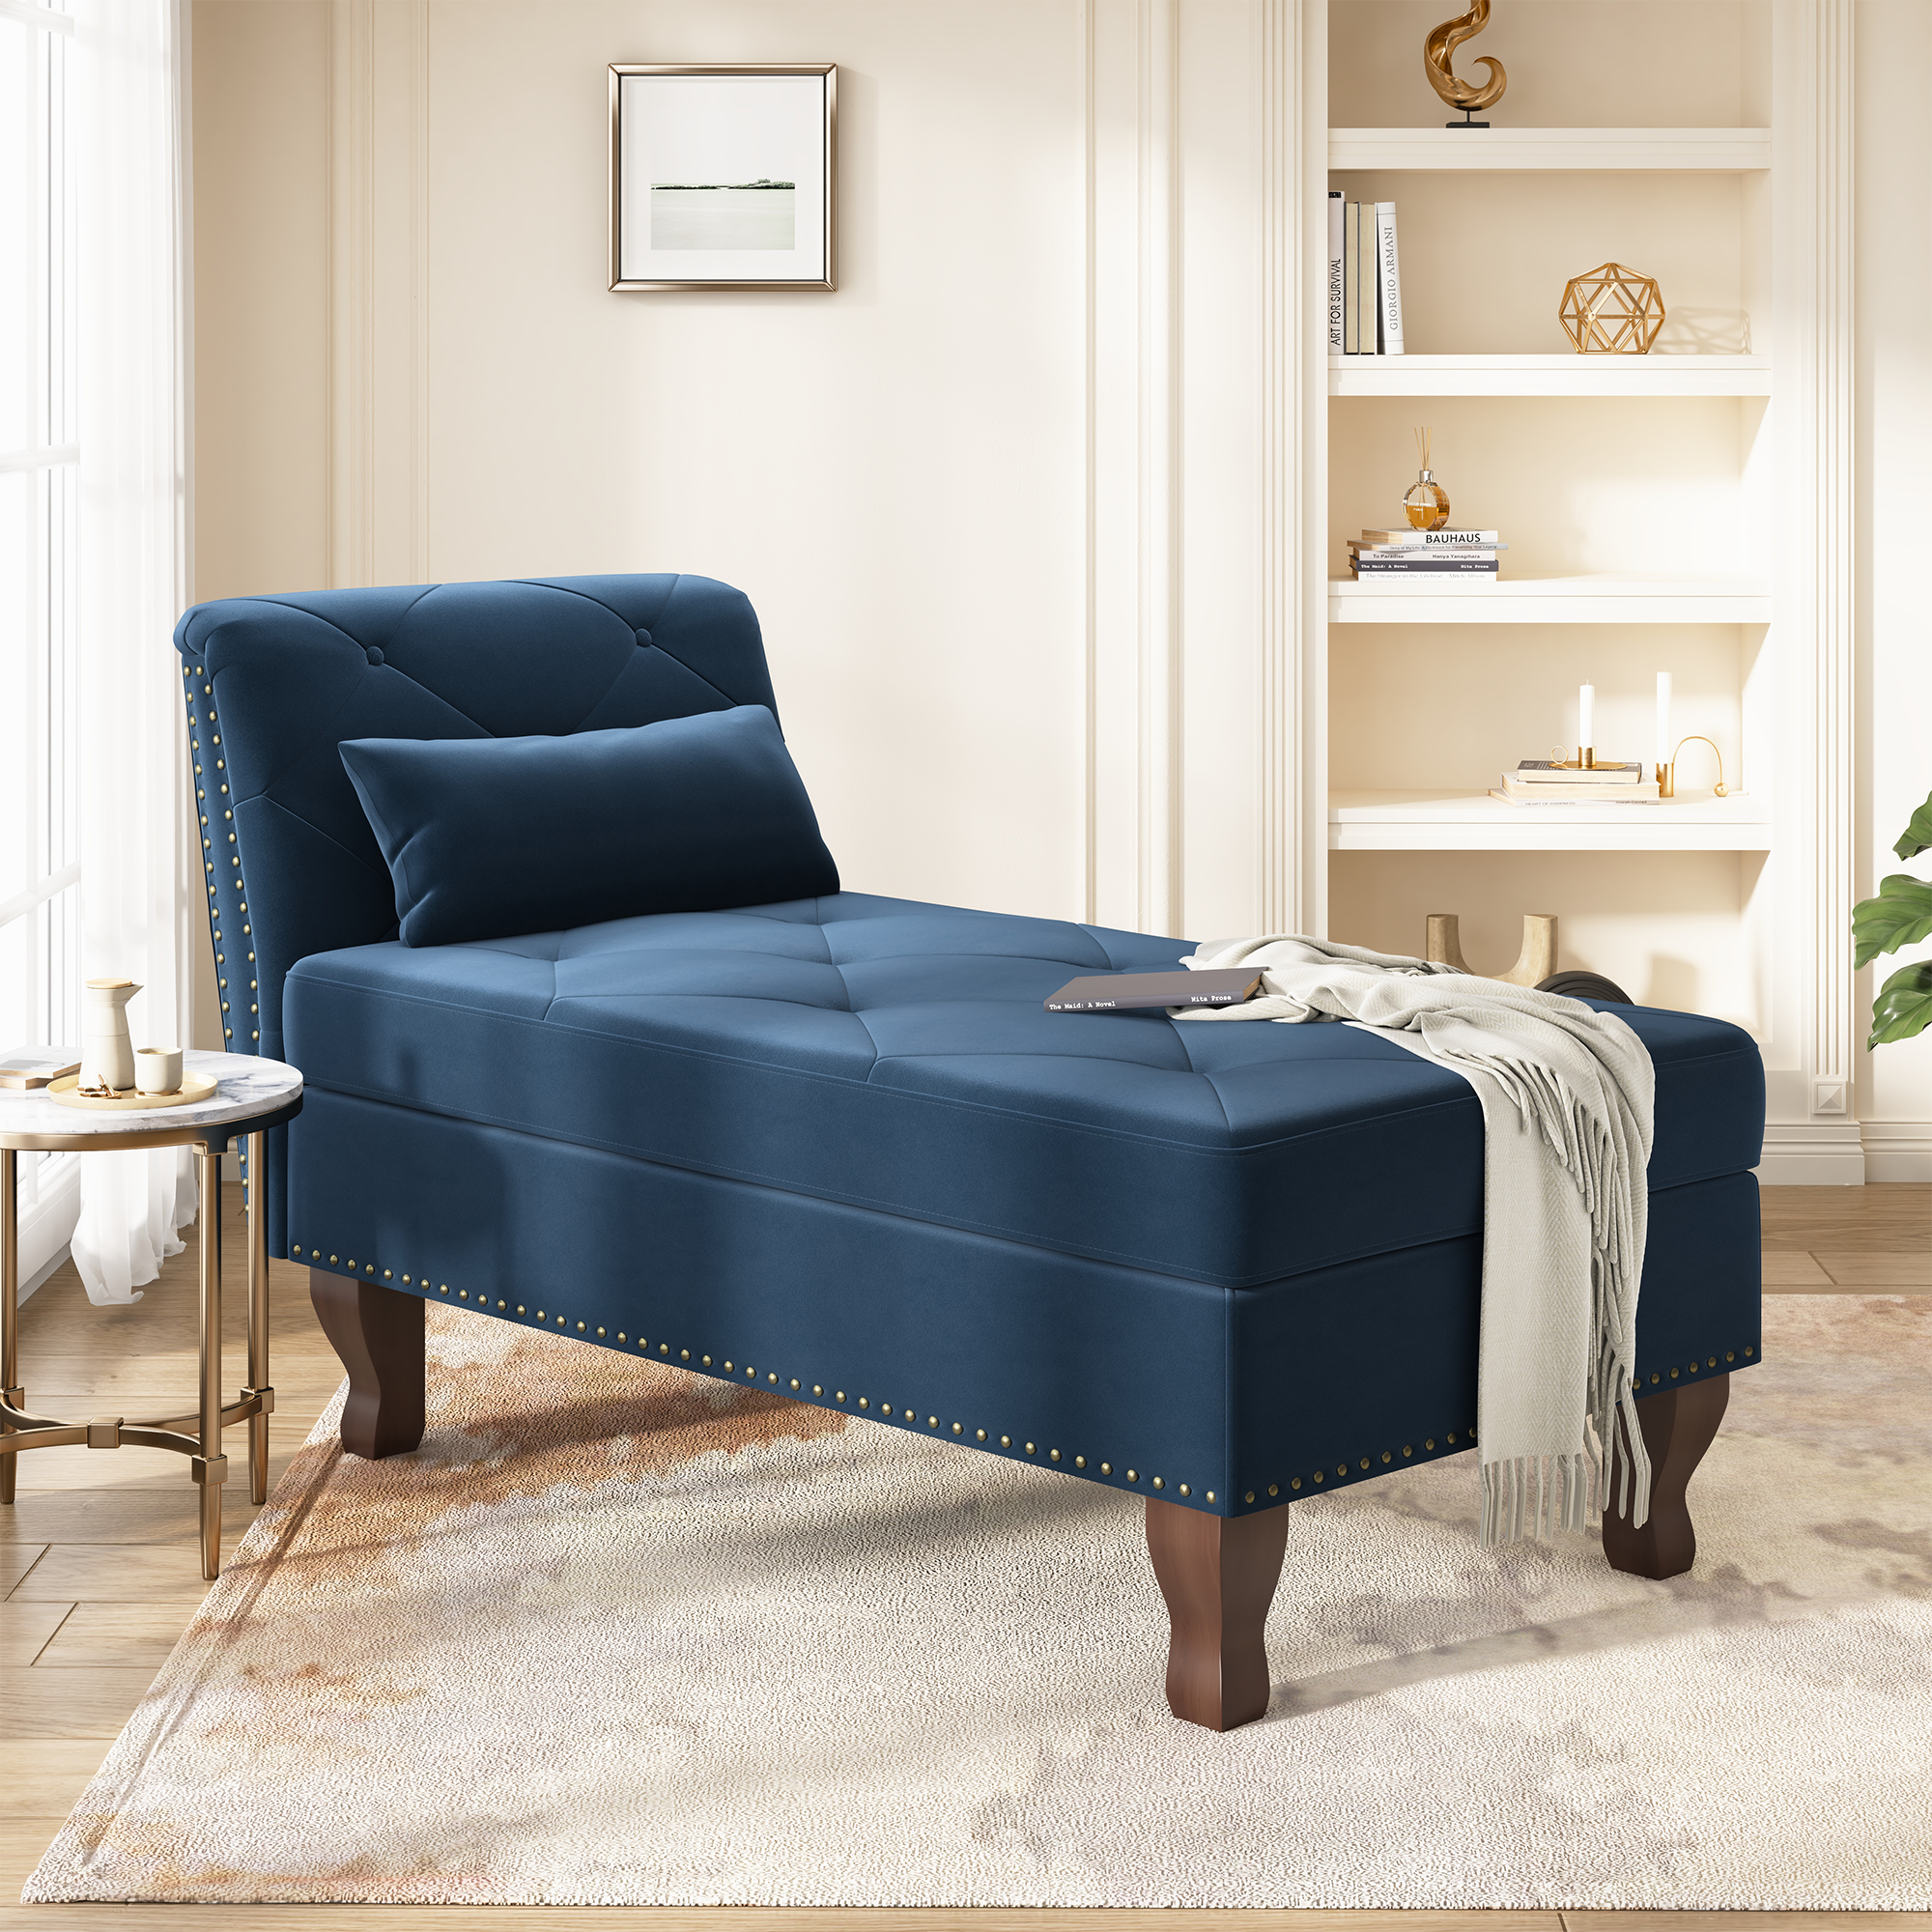 HONBAY Velvet Lounge Chair Sofa Couch with Storage Space